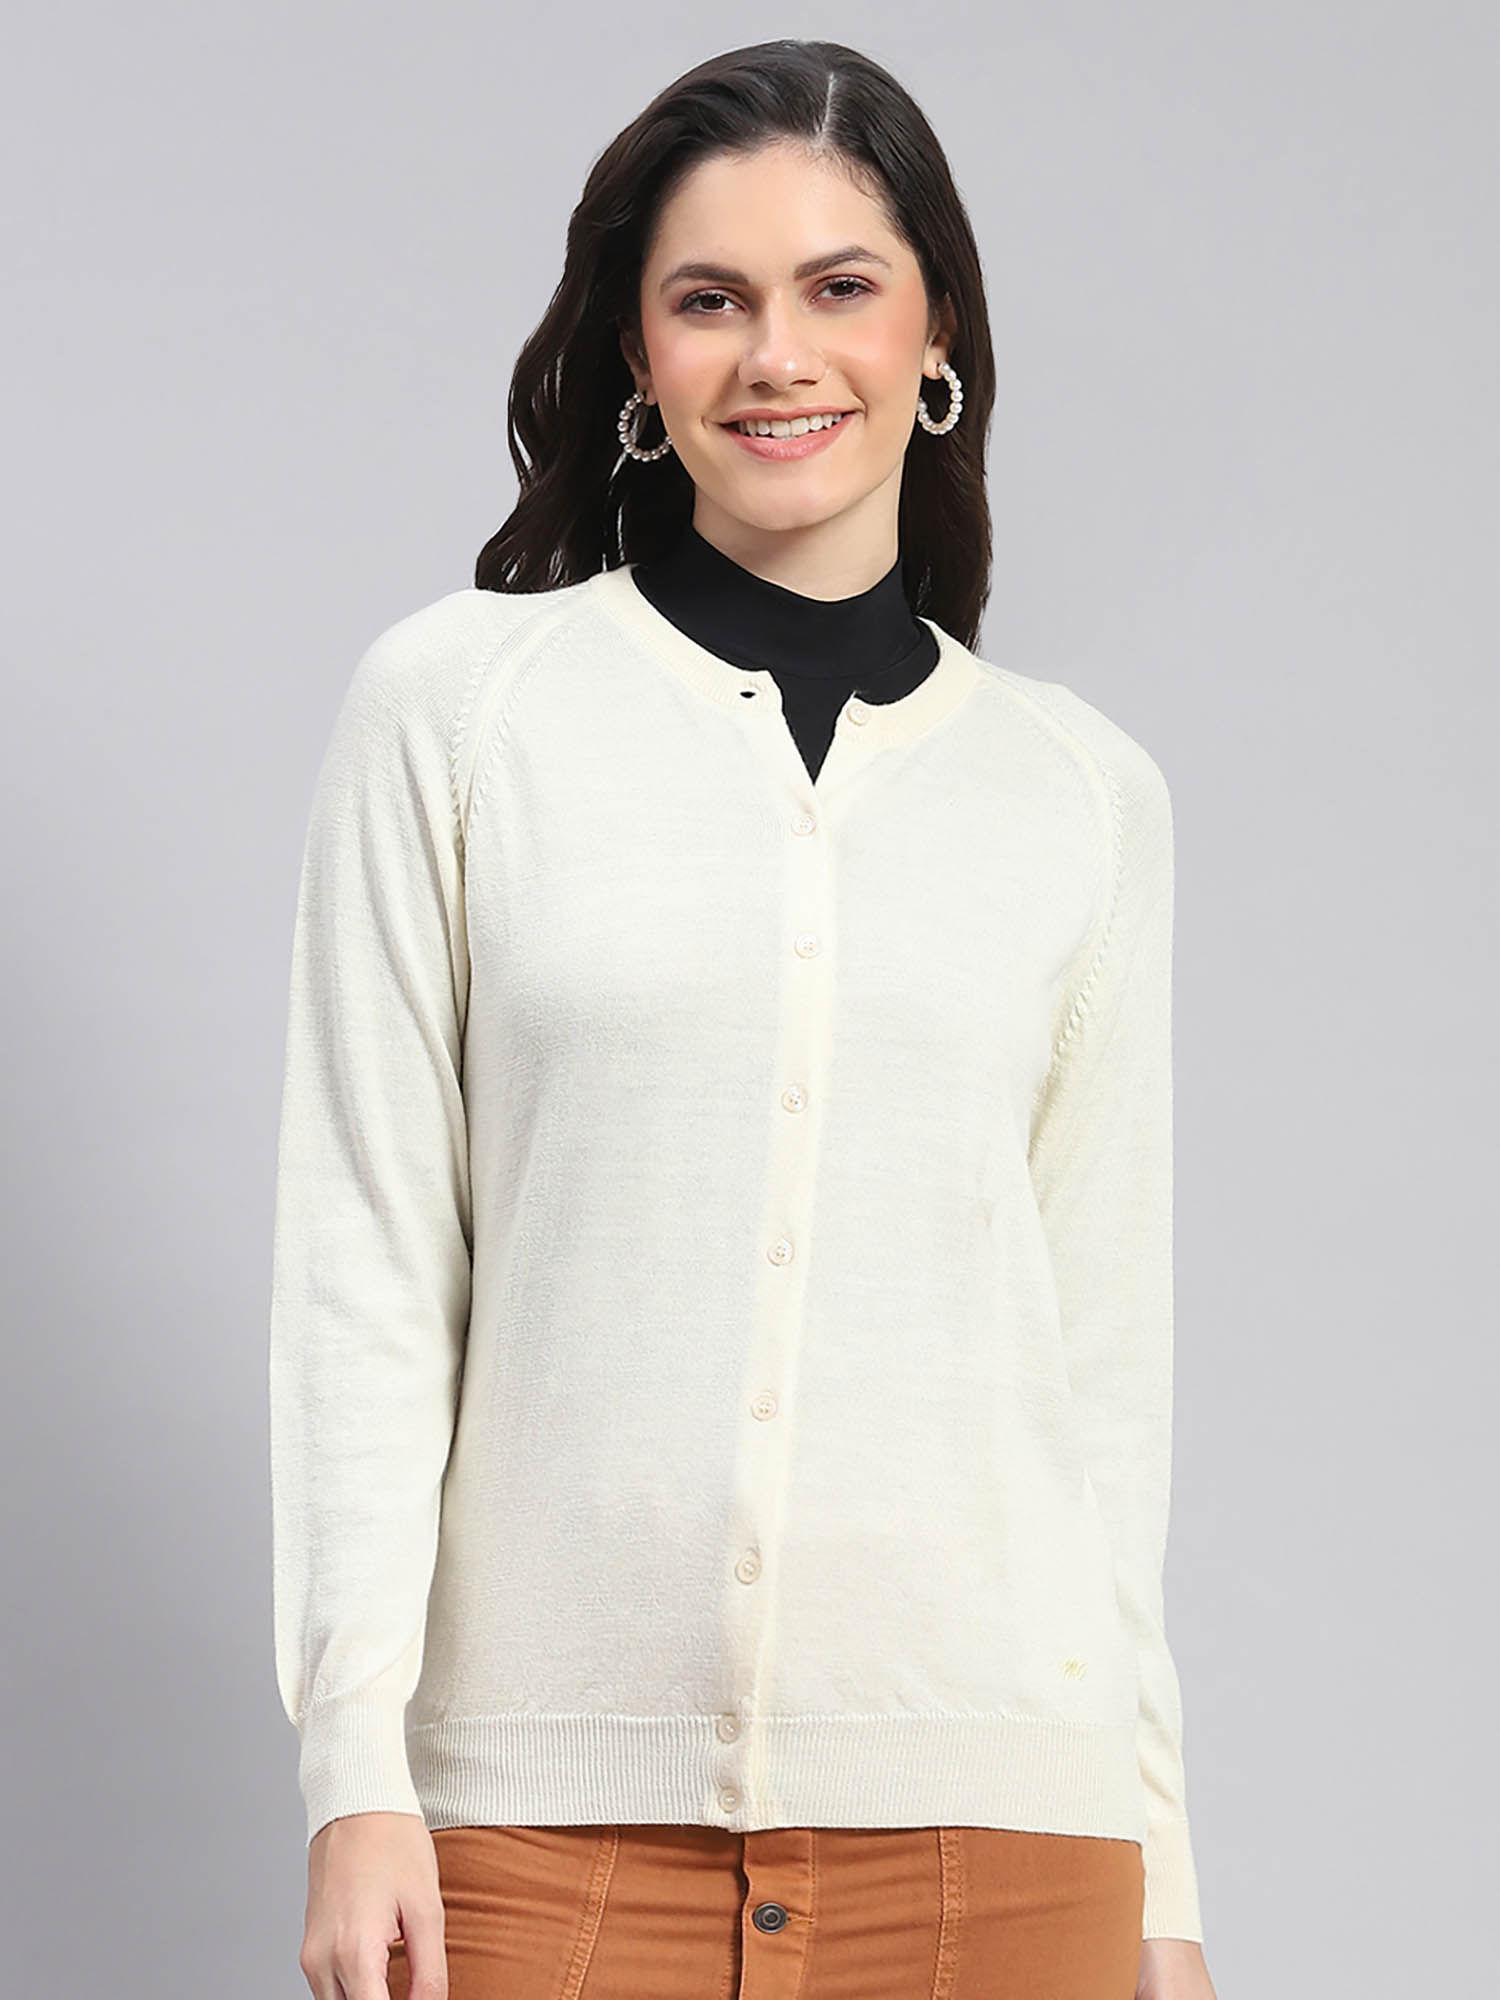 Women Solid Full Sleeves Round Neck Off White Cardigan